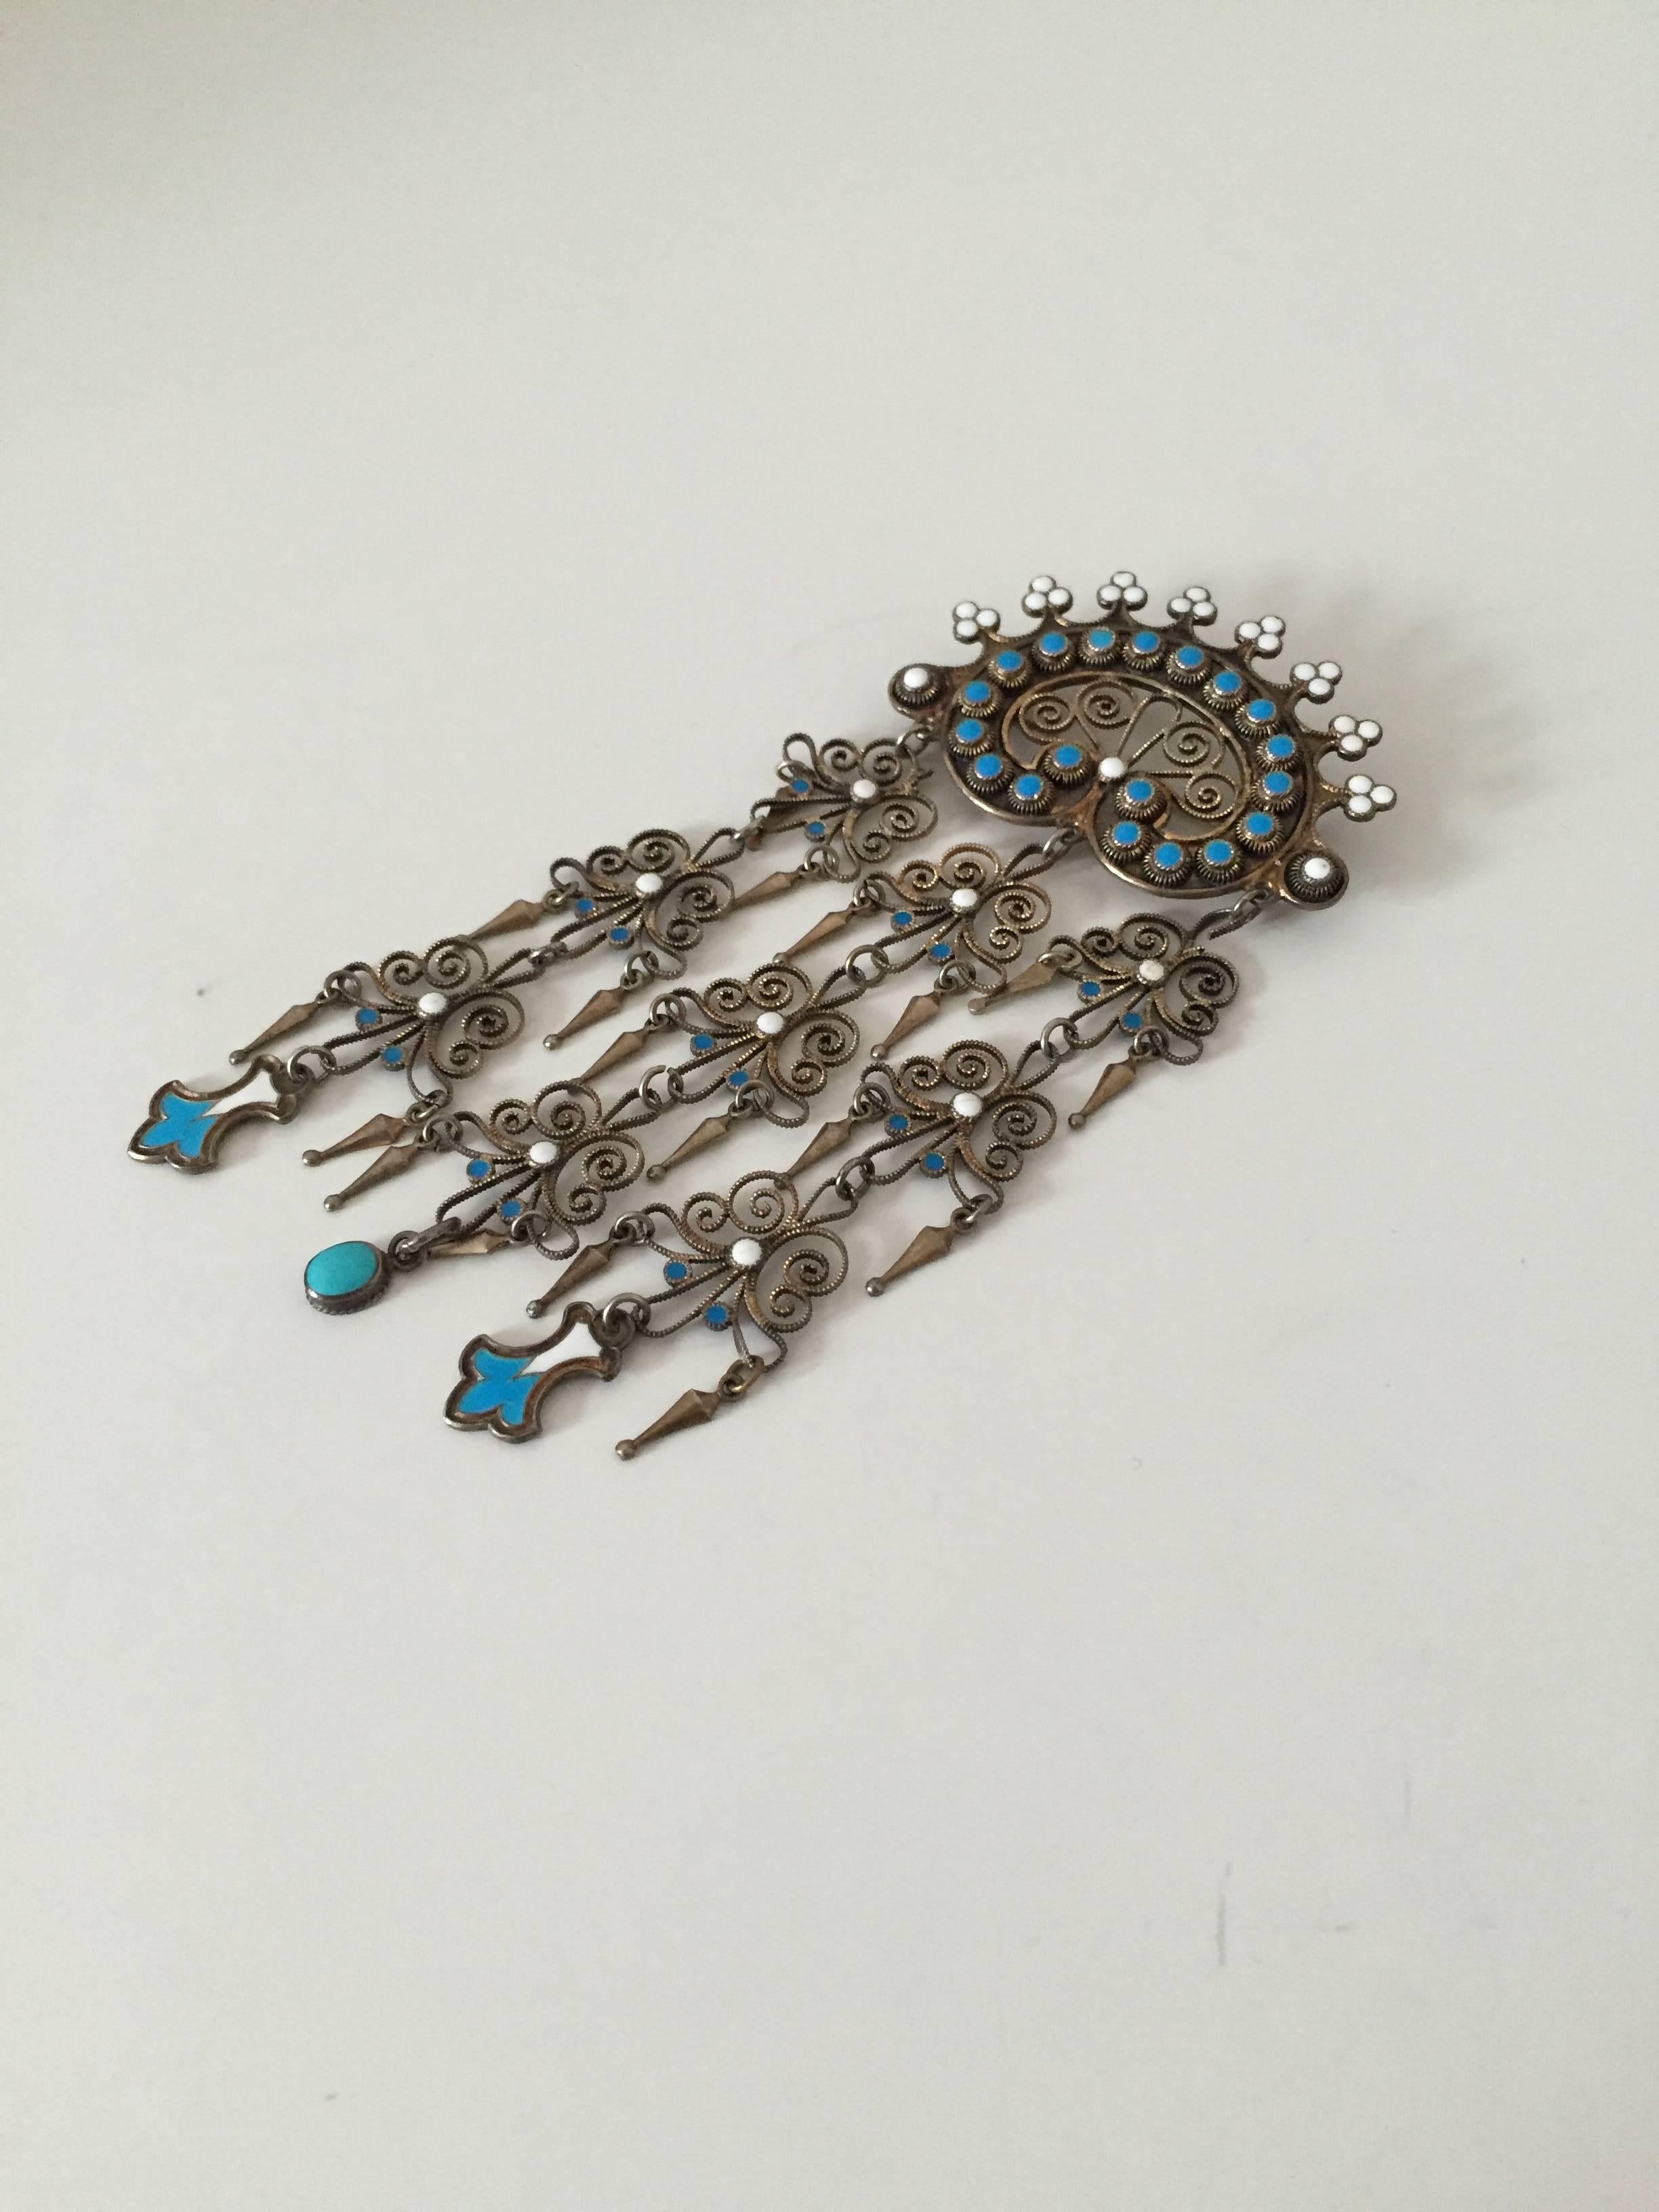 20th Century Art Nouveau Brooch in Sterling Silver and Enamel by Marius Hammer